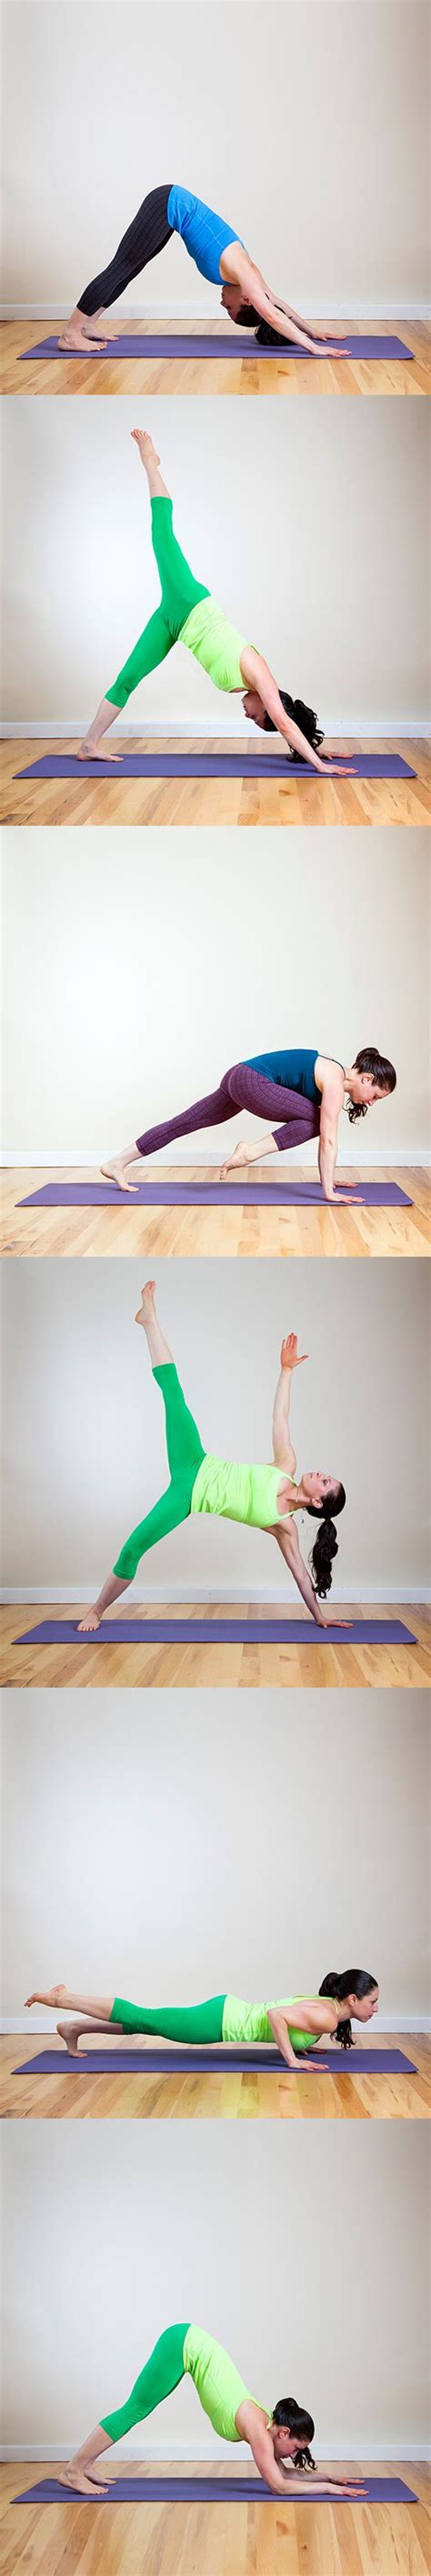 Start Now 6 Pose Yoga Sequence To Tone Your Arms By Summer Basic